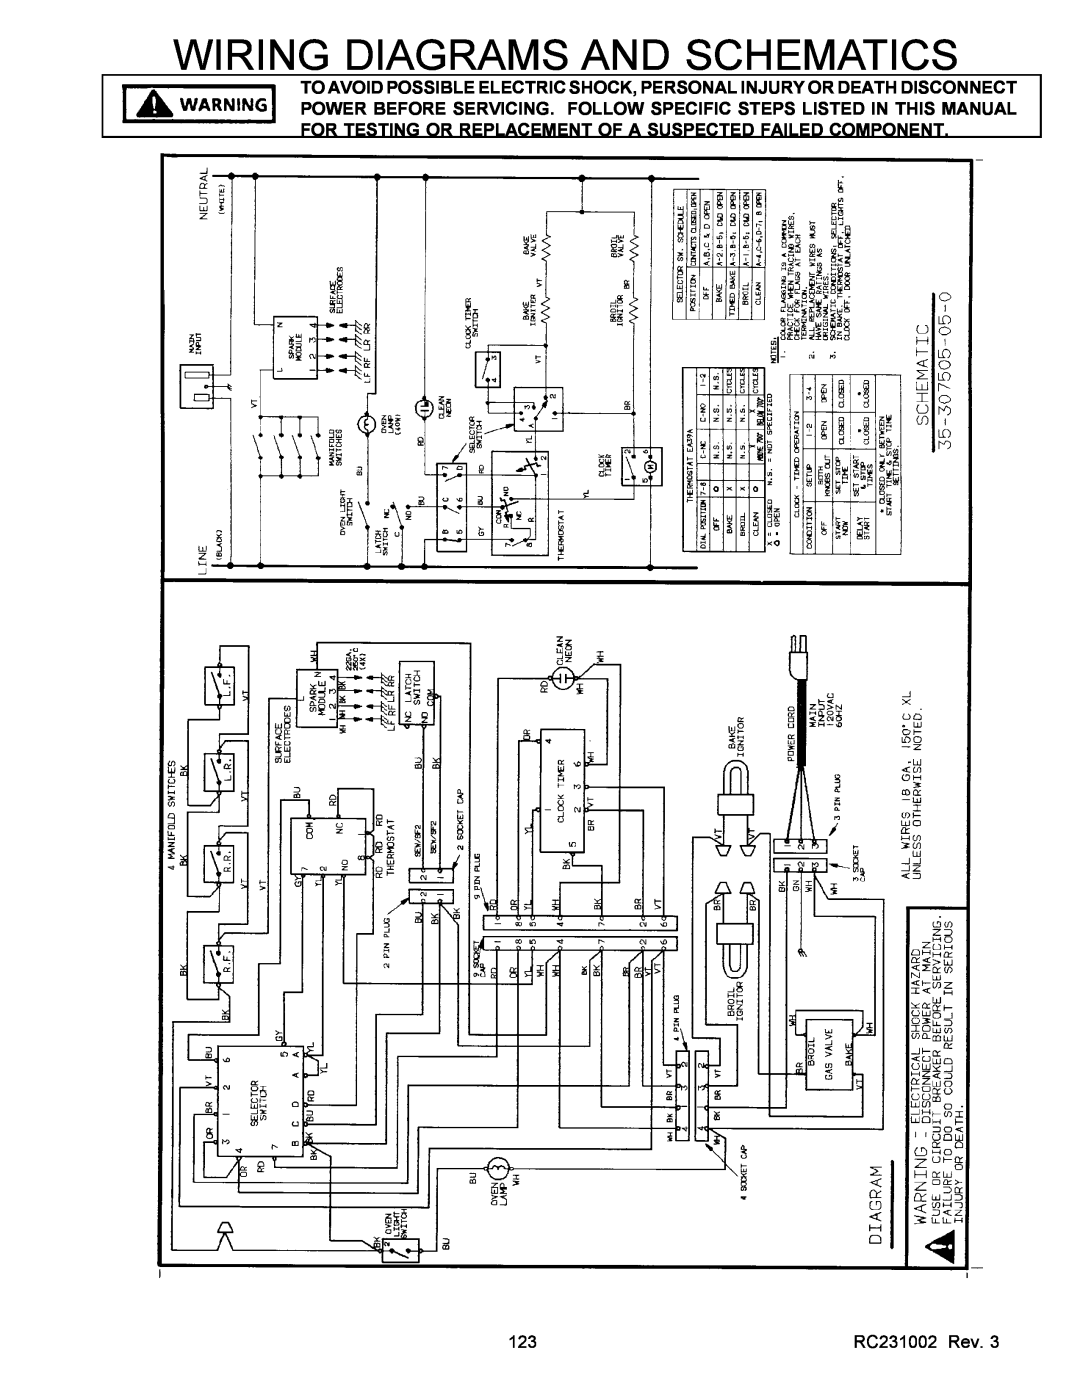 Amana RSS, RST service manual Wiring Diagrams And Schematics, RC231002 Rev 